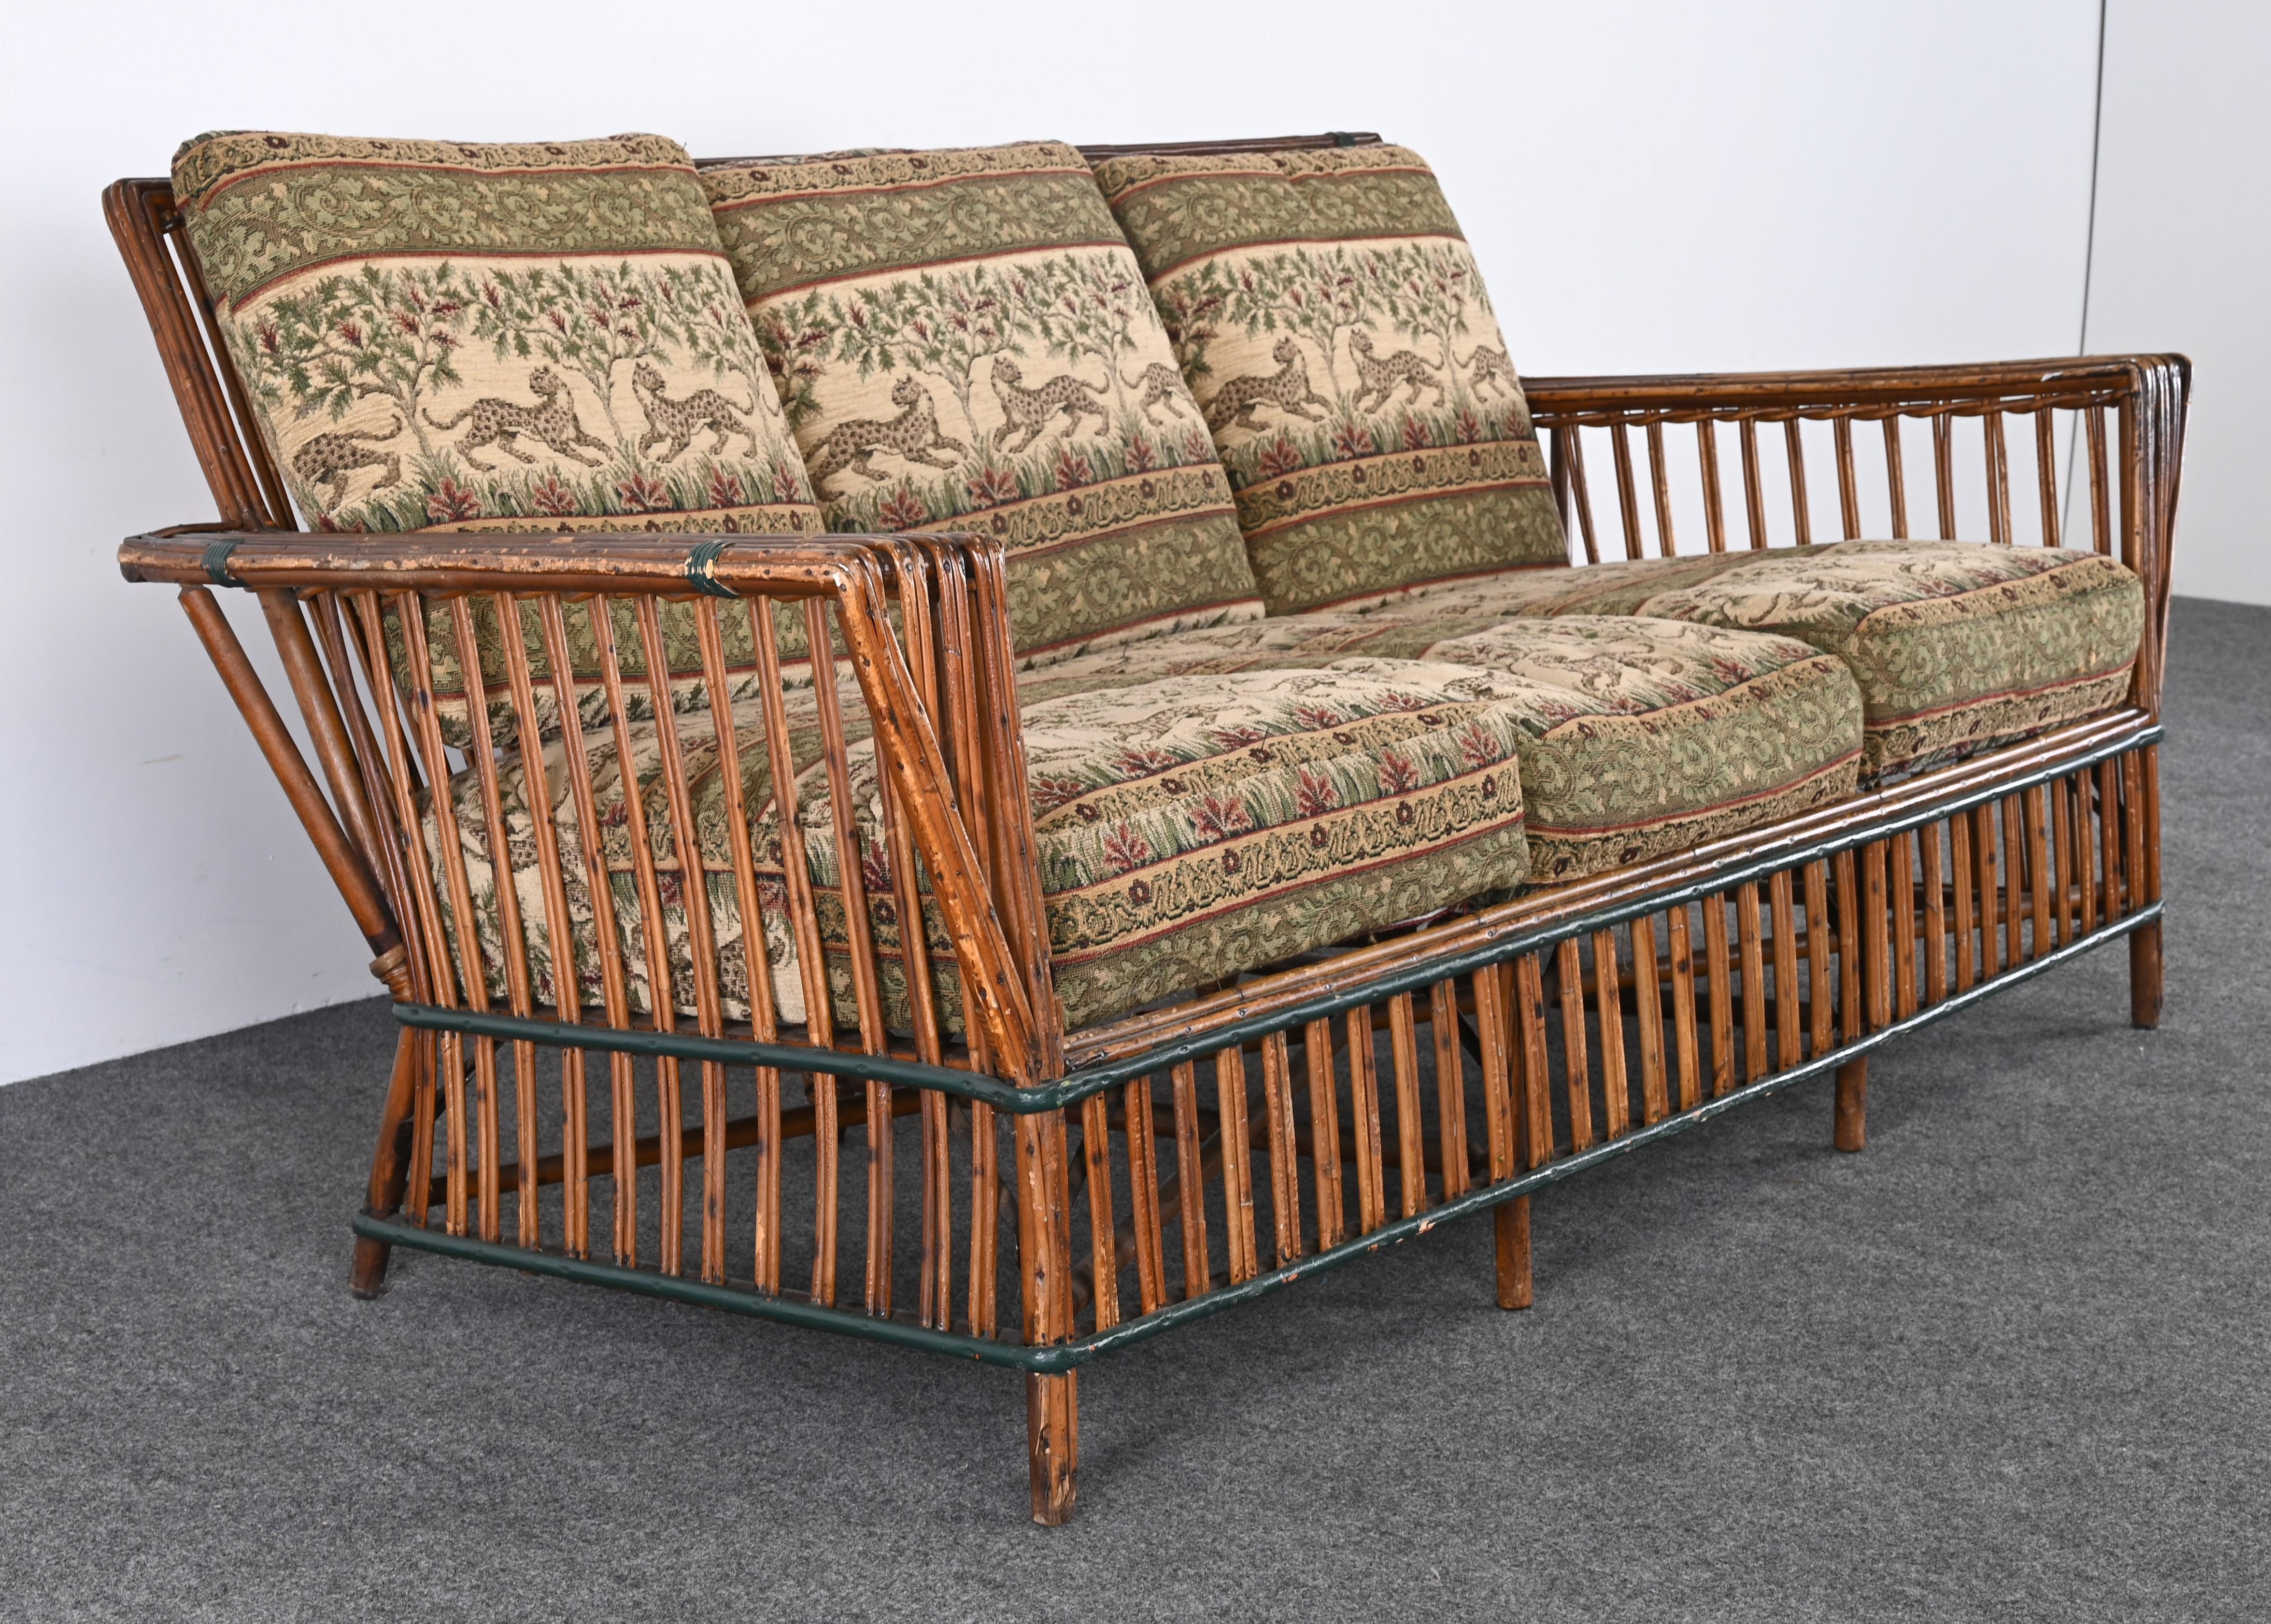 Art Deco Split Ypsilanti Stick Reed Wicker or Sofa with Pair Arm Chairs c. 1930s For Sale 13